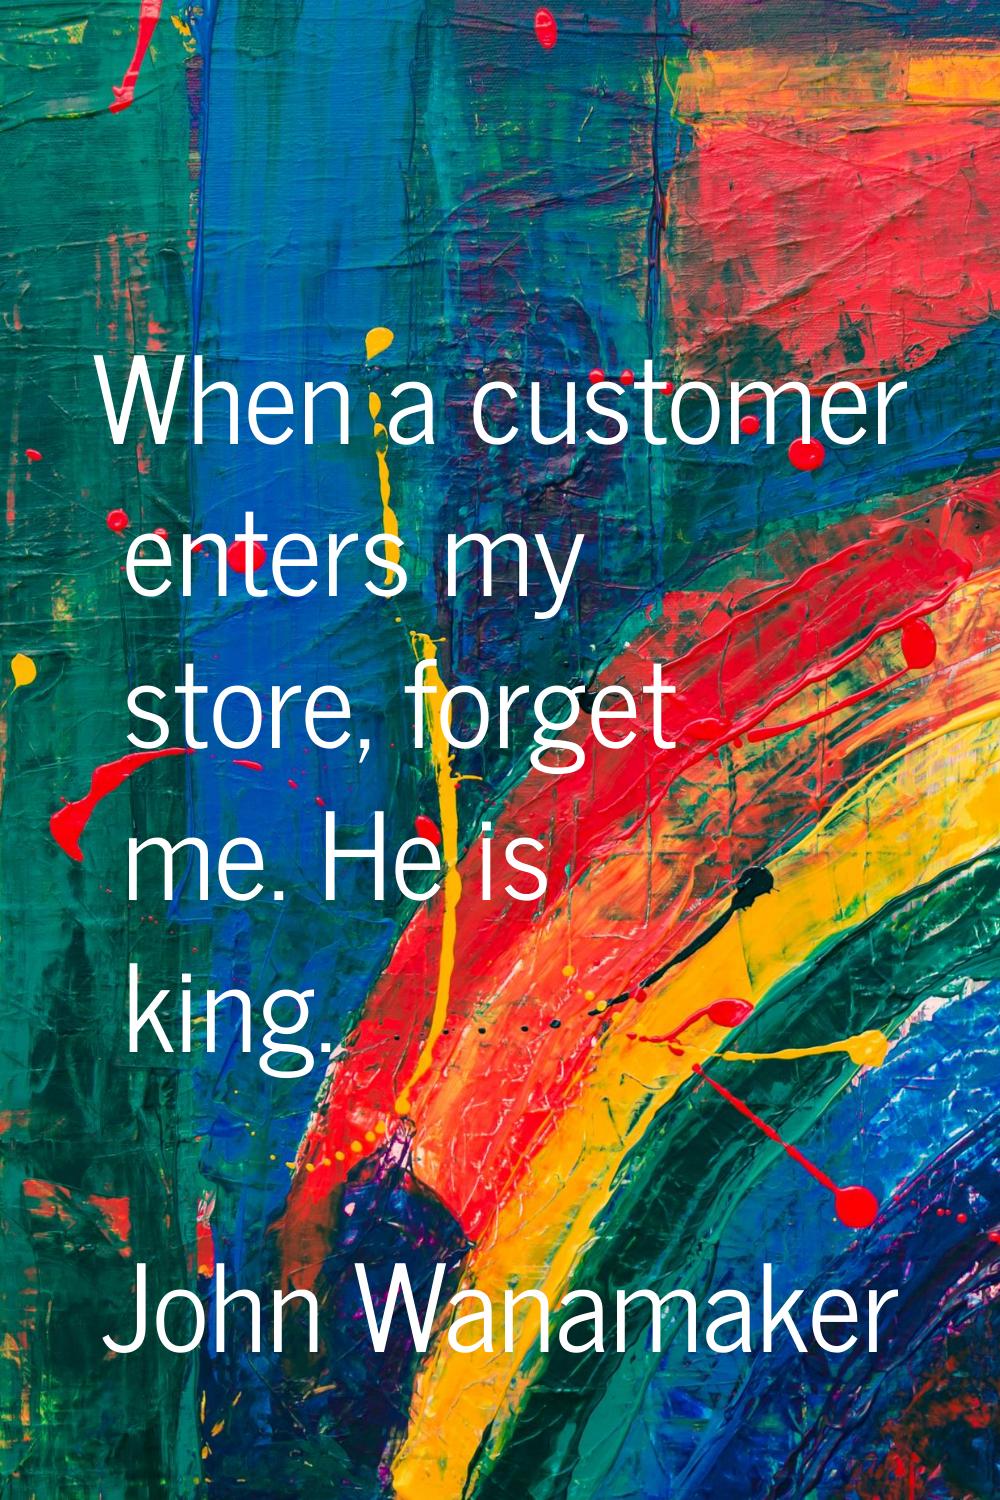 When a customer enters my store, forget me. He is king.